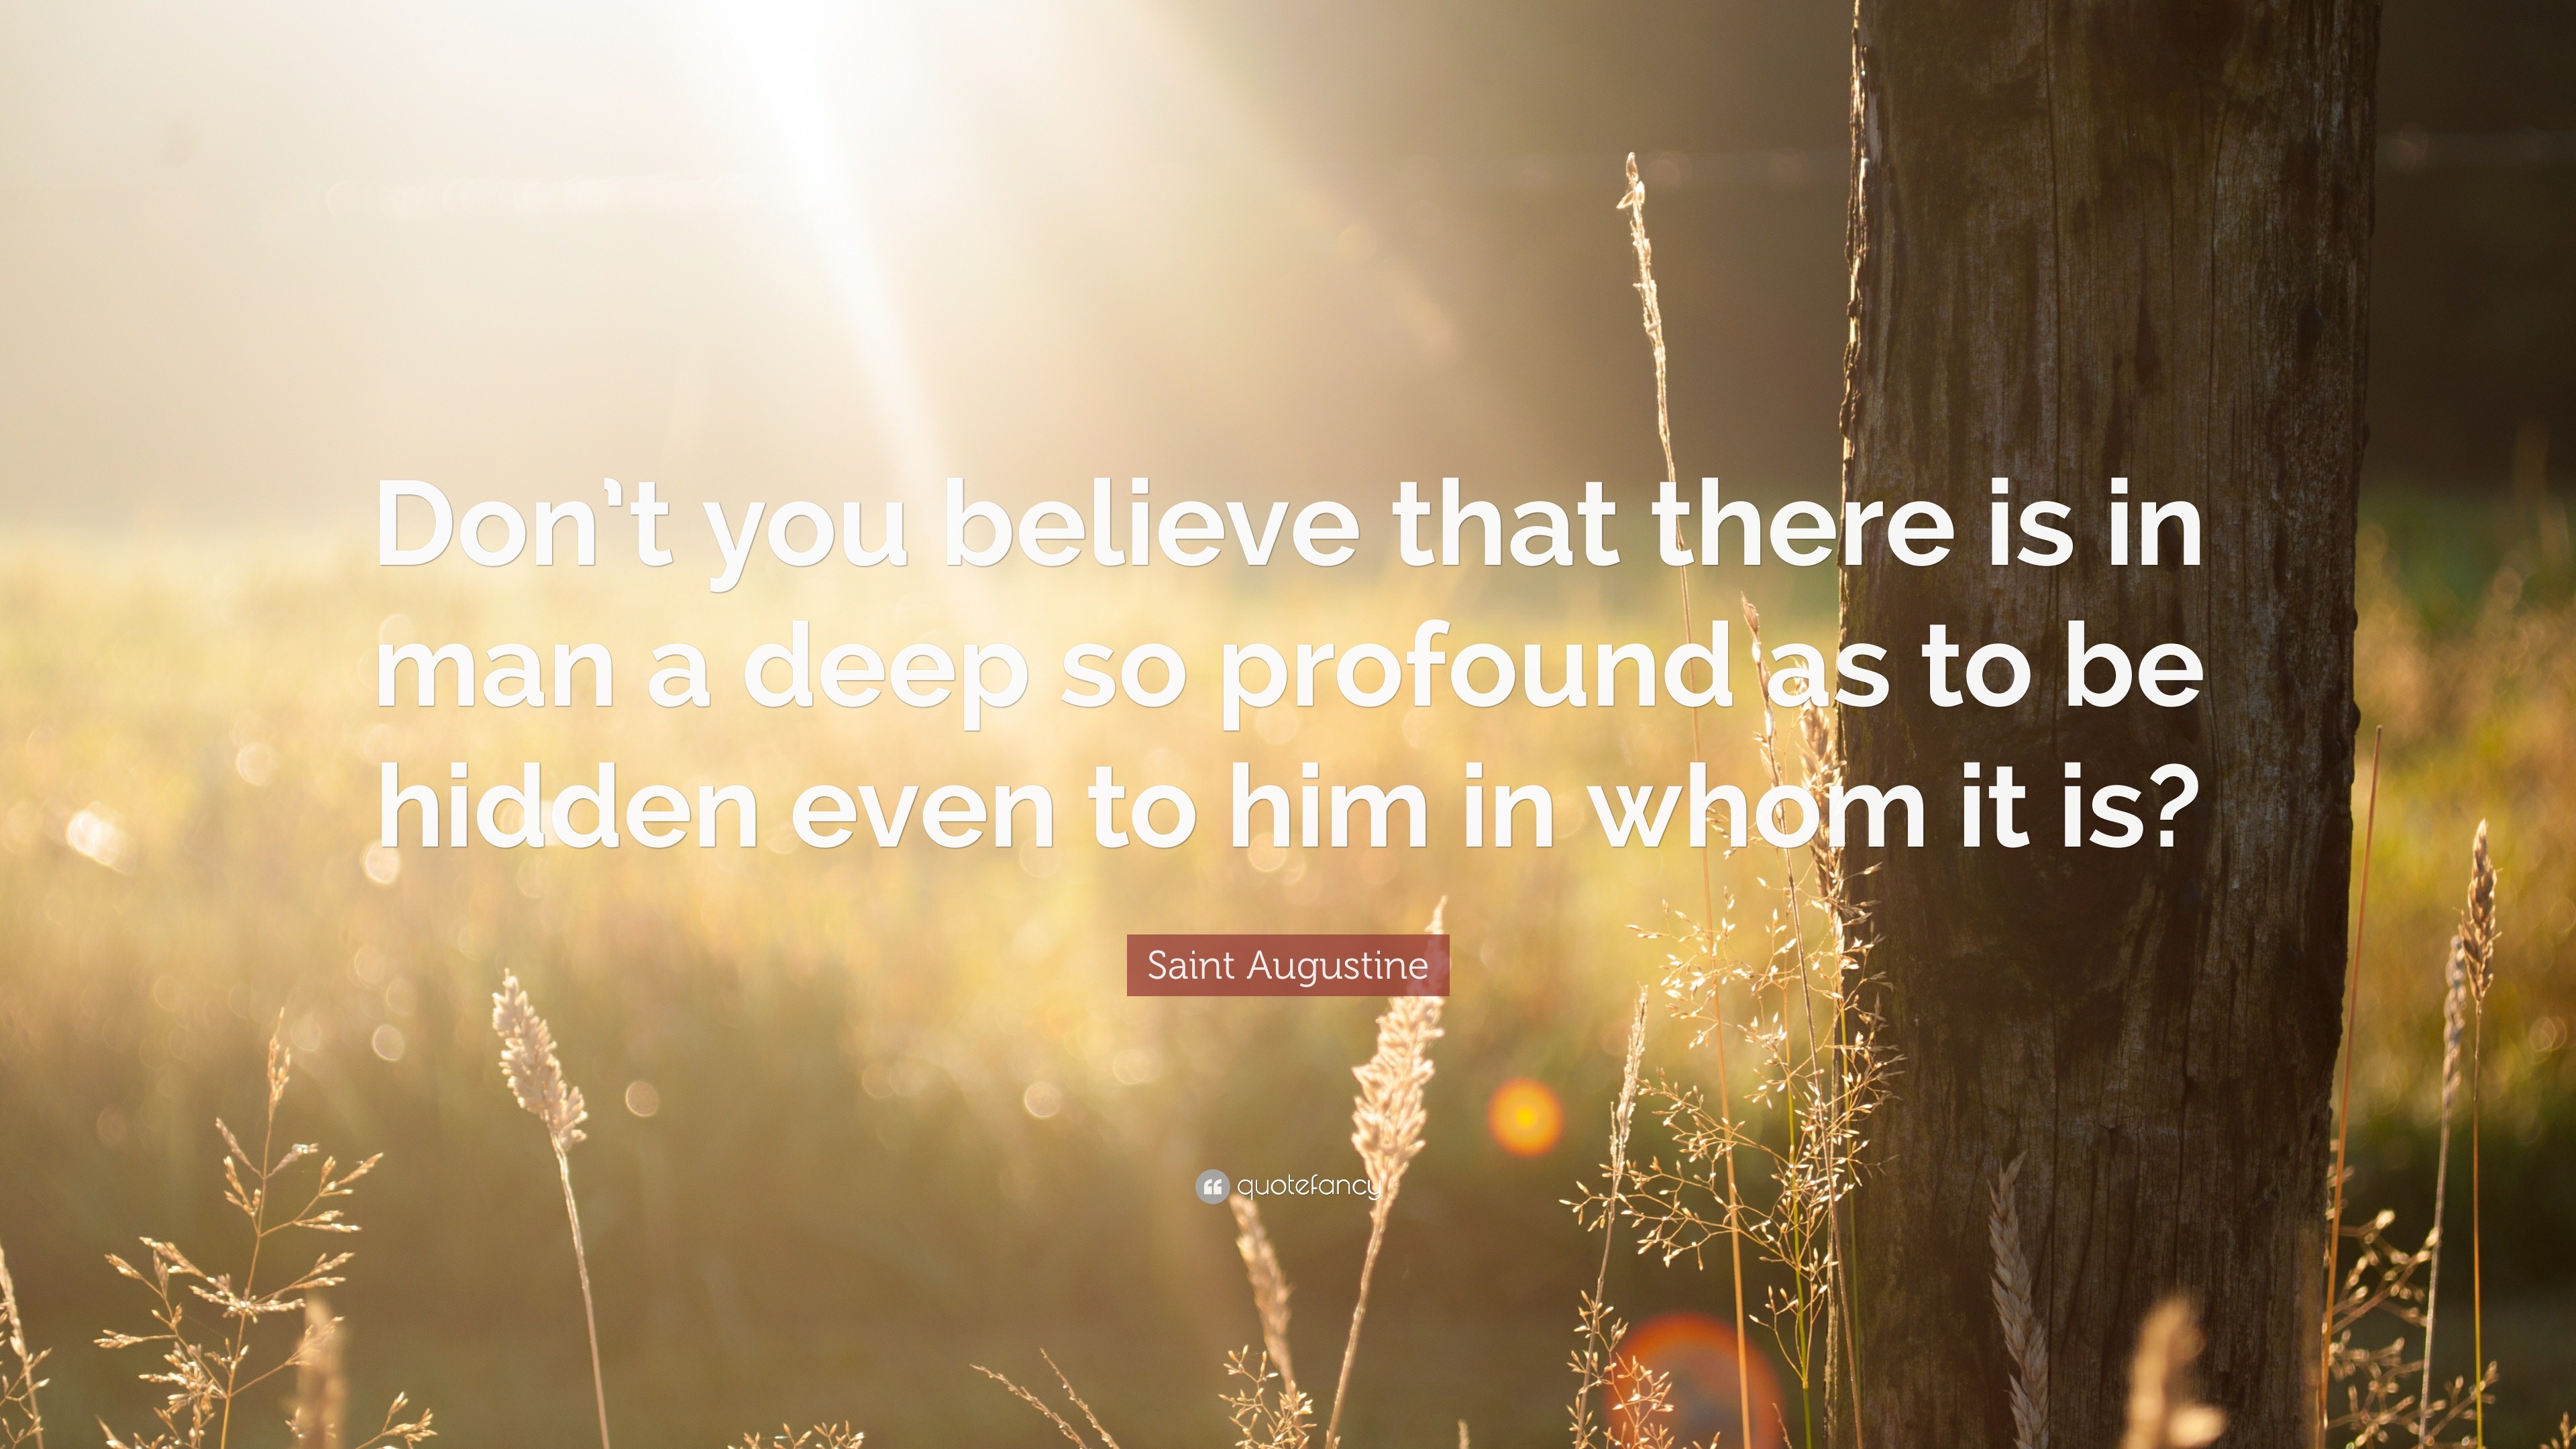 Saint Augustine quote: Don't you believe that there is in man a deep